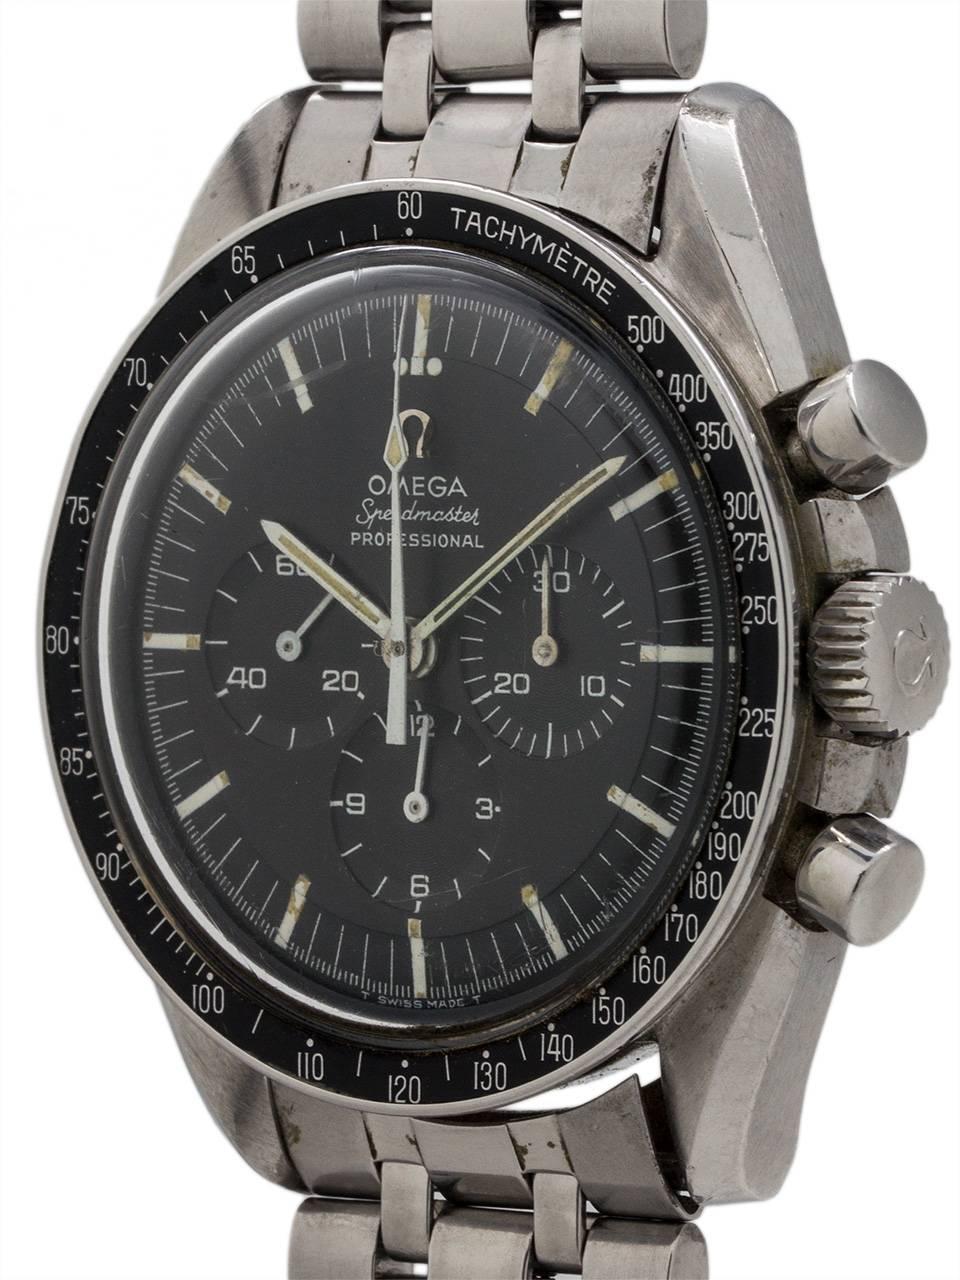 Vintage Omega Speedmaster ref 145.012-67 circa 1968. Extremely nice example pre-moon Speedmaster model movement serial # 26.5 million with venerable caliber 321 manual wind movement. Featuring a very pleasing original matte black step dial with,